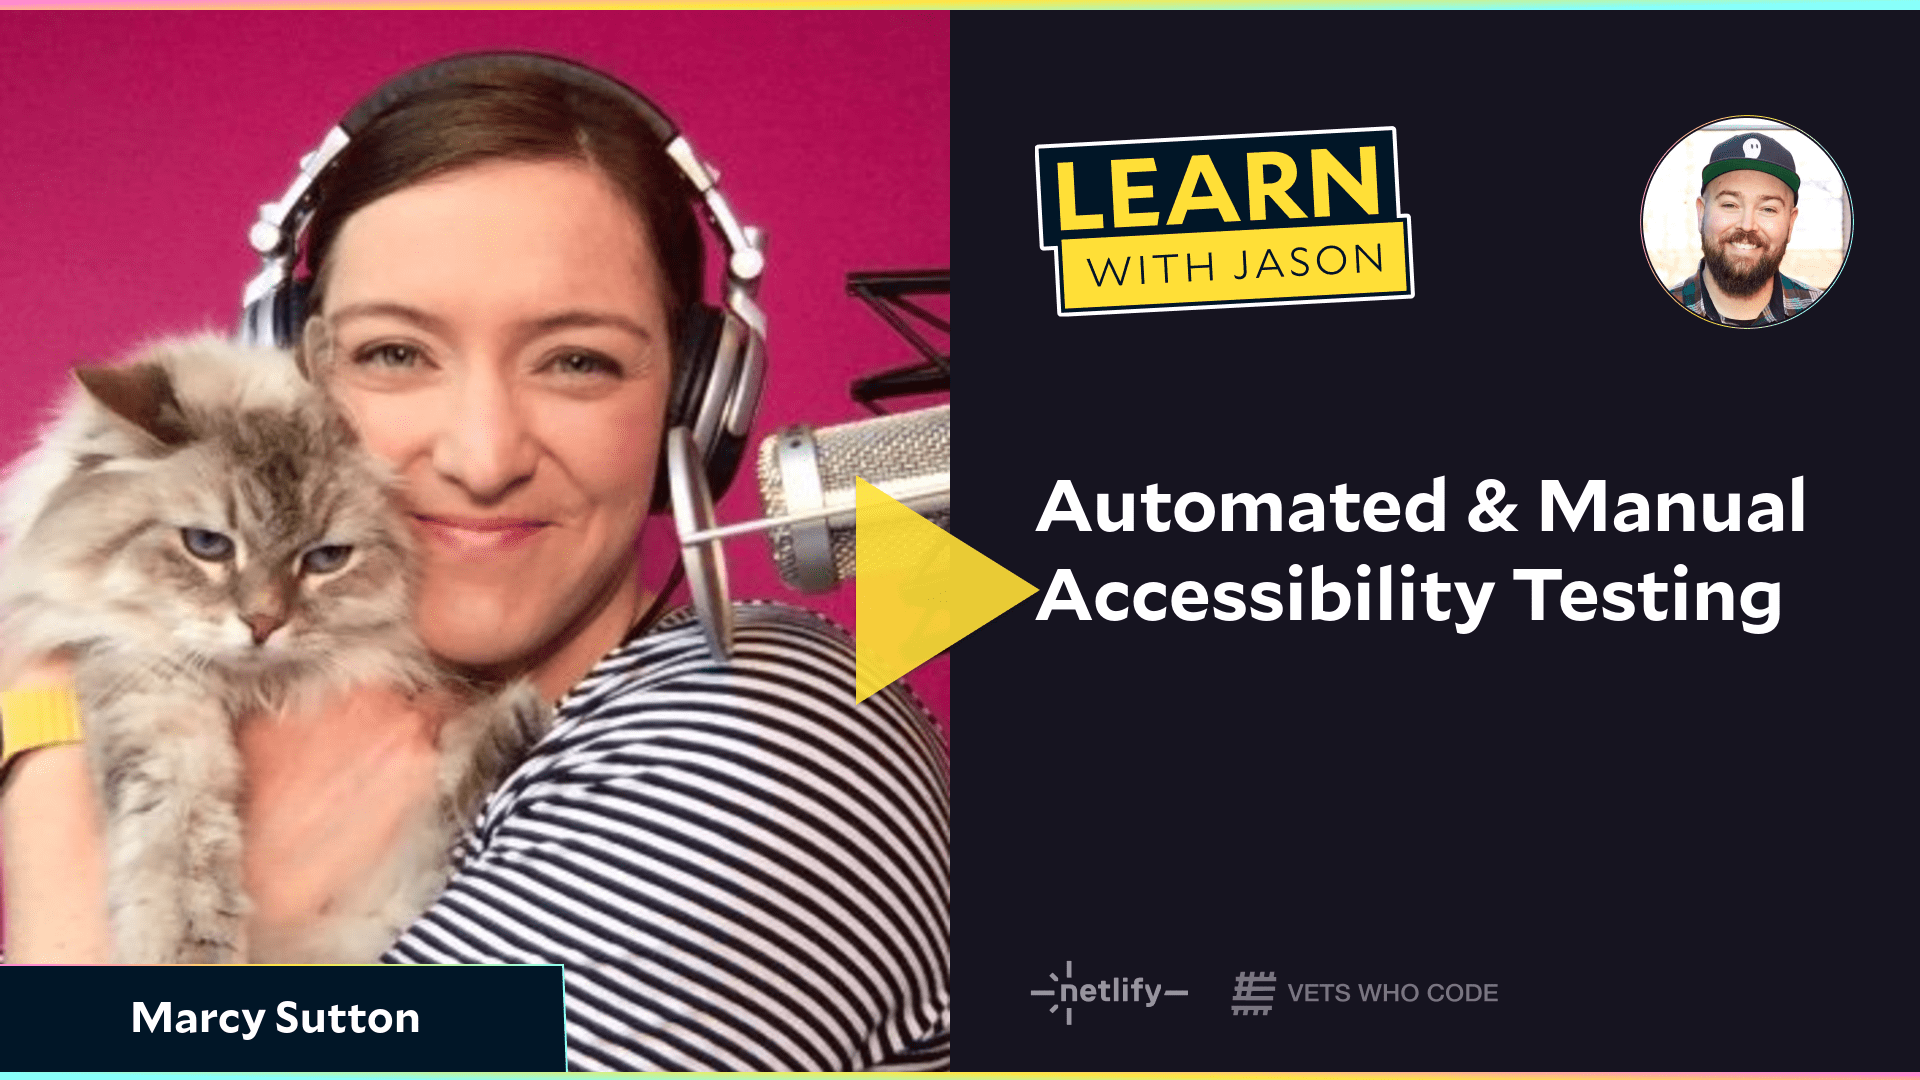 Automated & Manual Accessibility Testing (with Marcy Sutton)